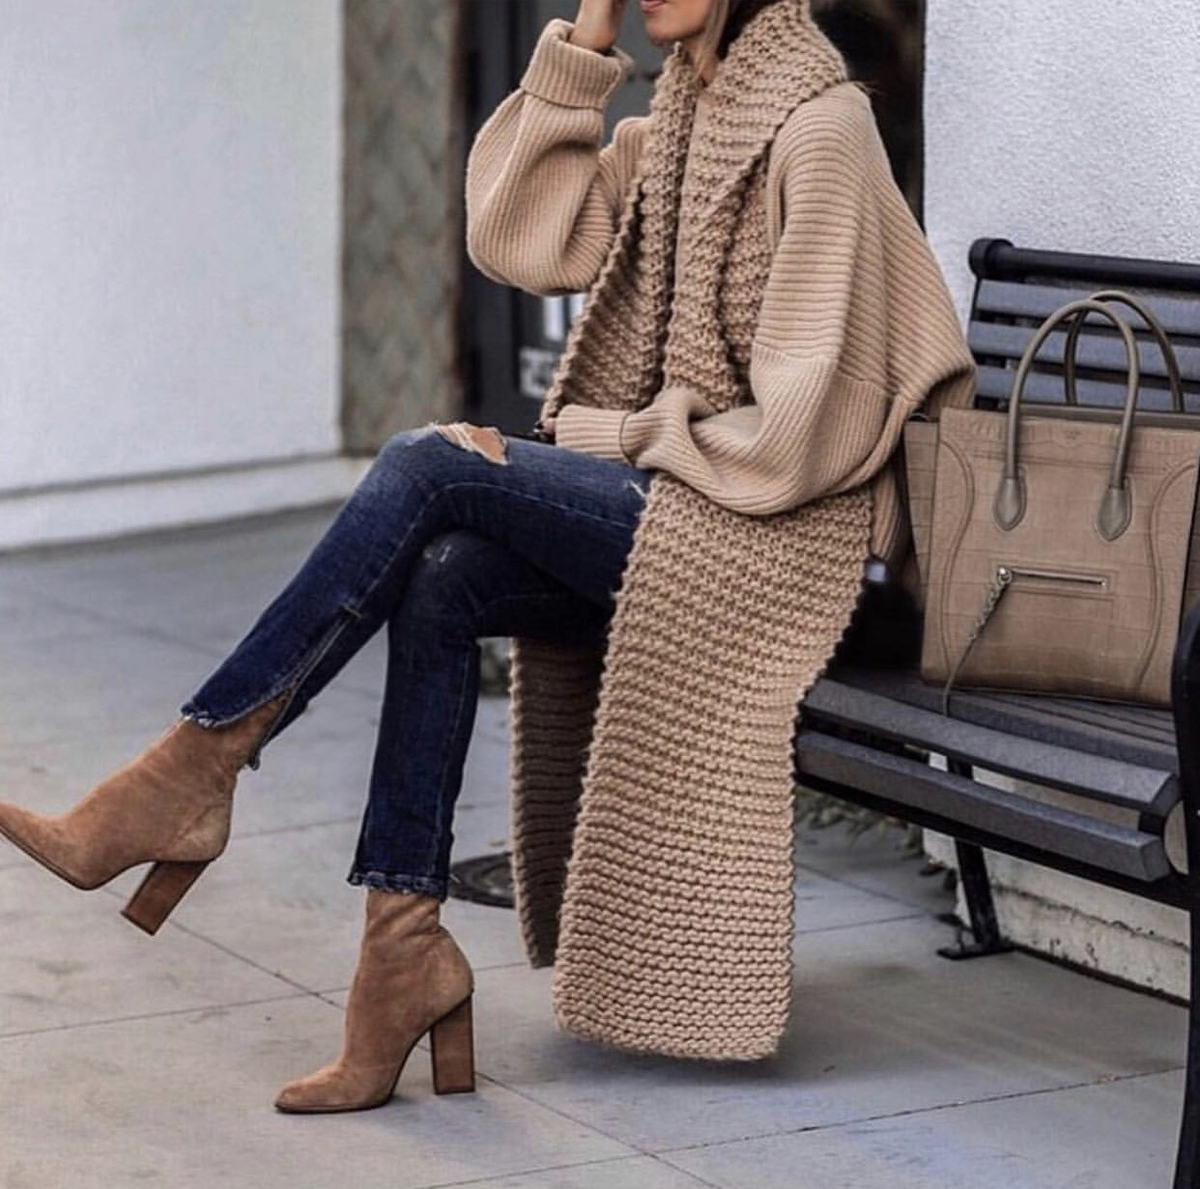 sweater styles, chic sweater styles, sweater styles of fall 2019, chunky sweater outfit, fall style inspiration, chunky knit scarf | lolario style